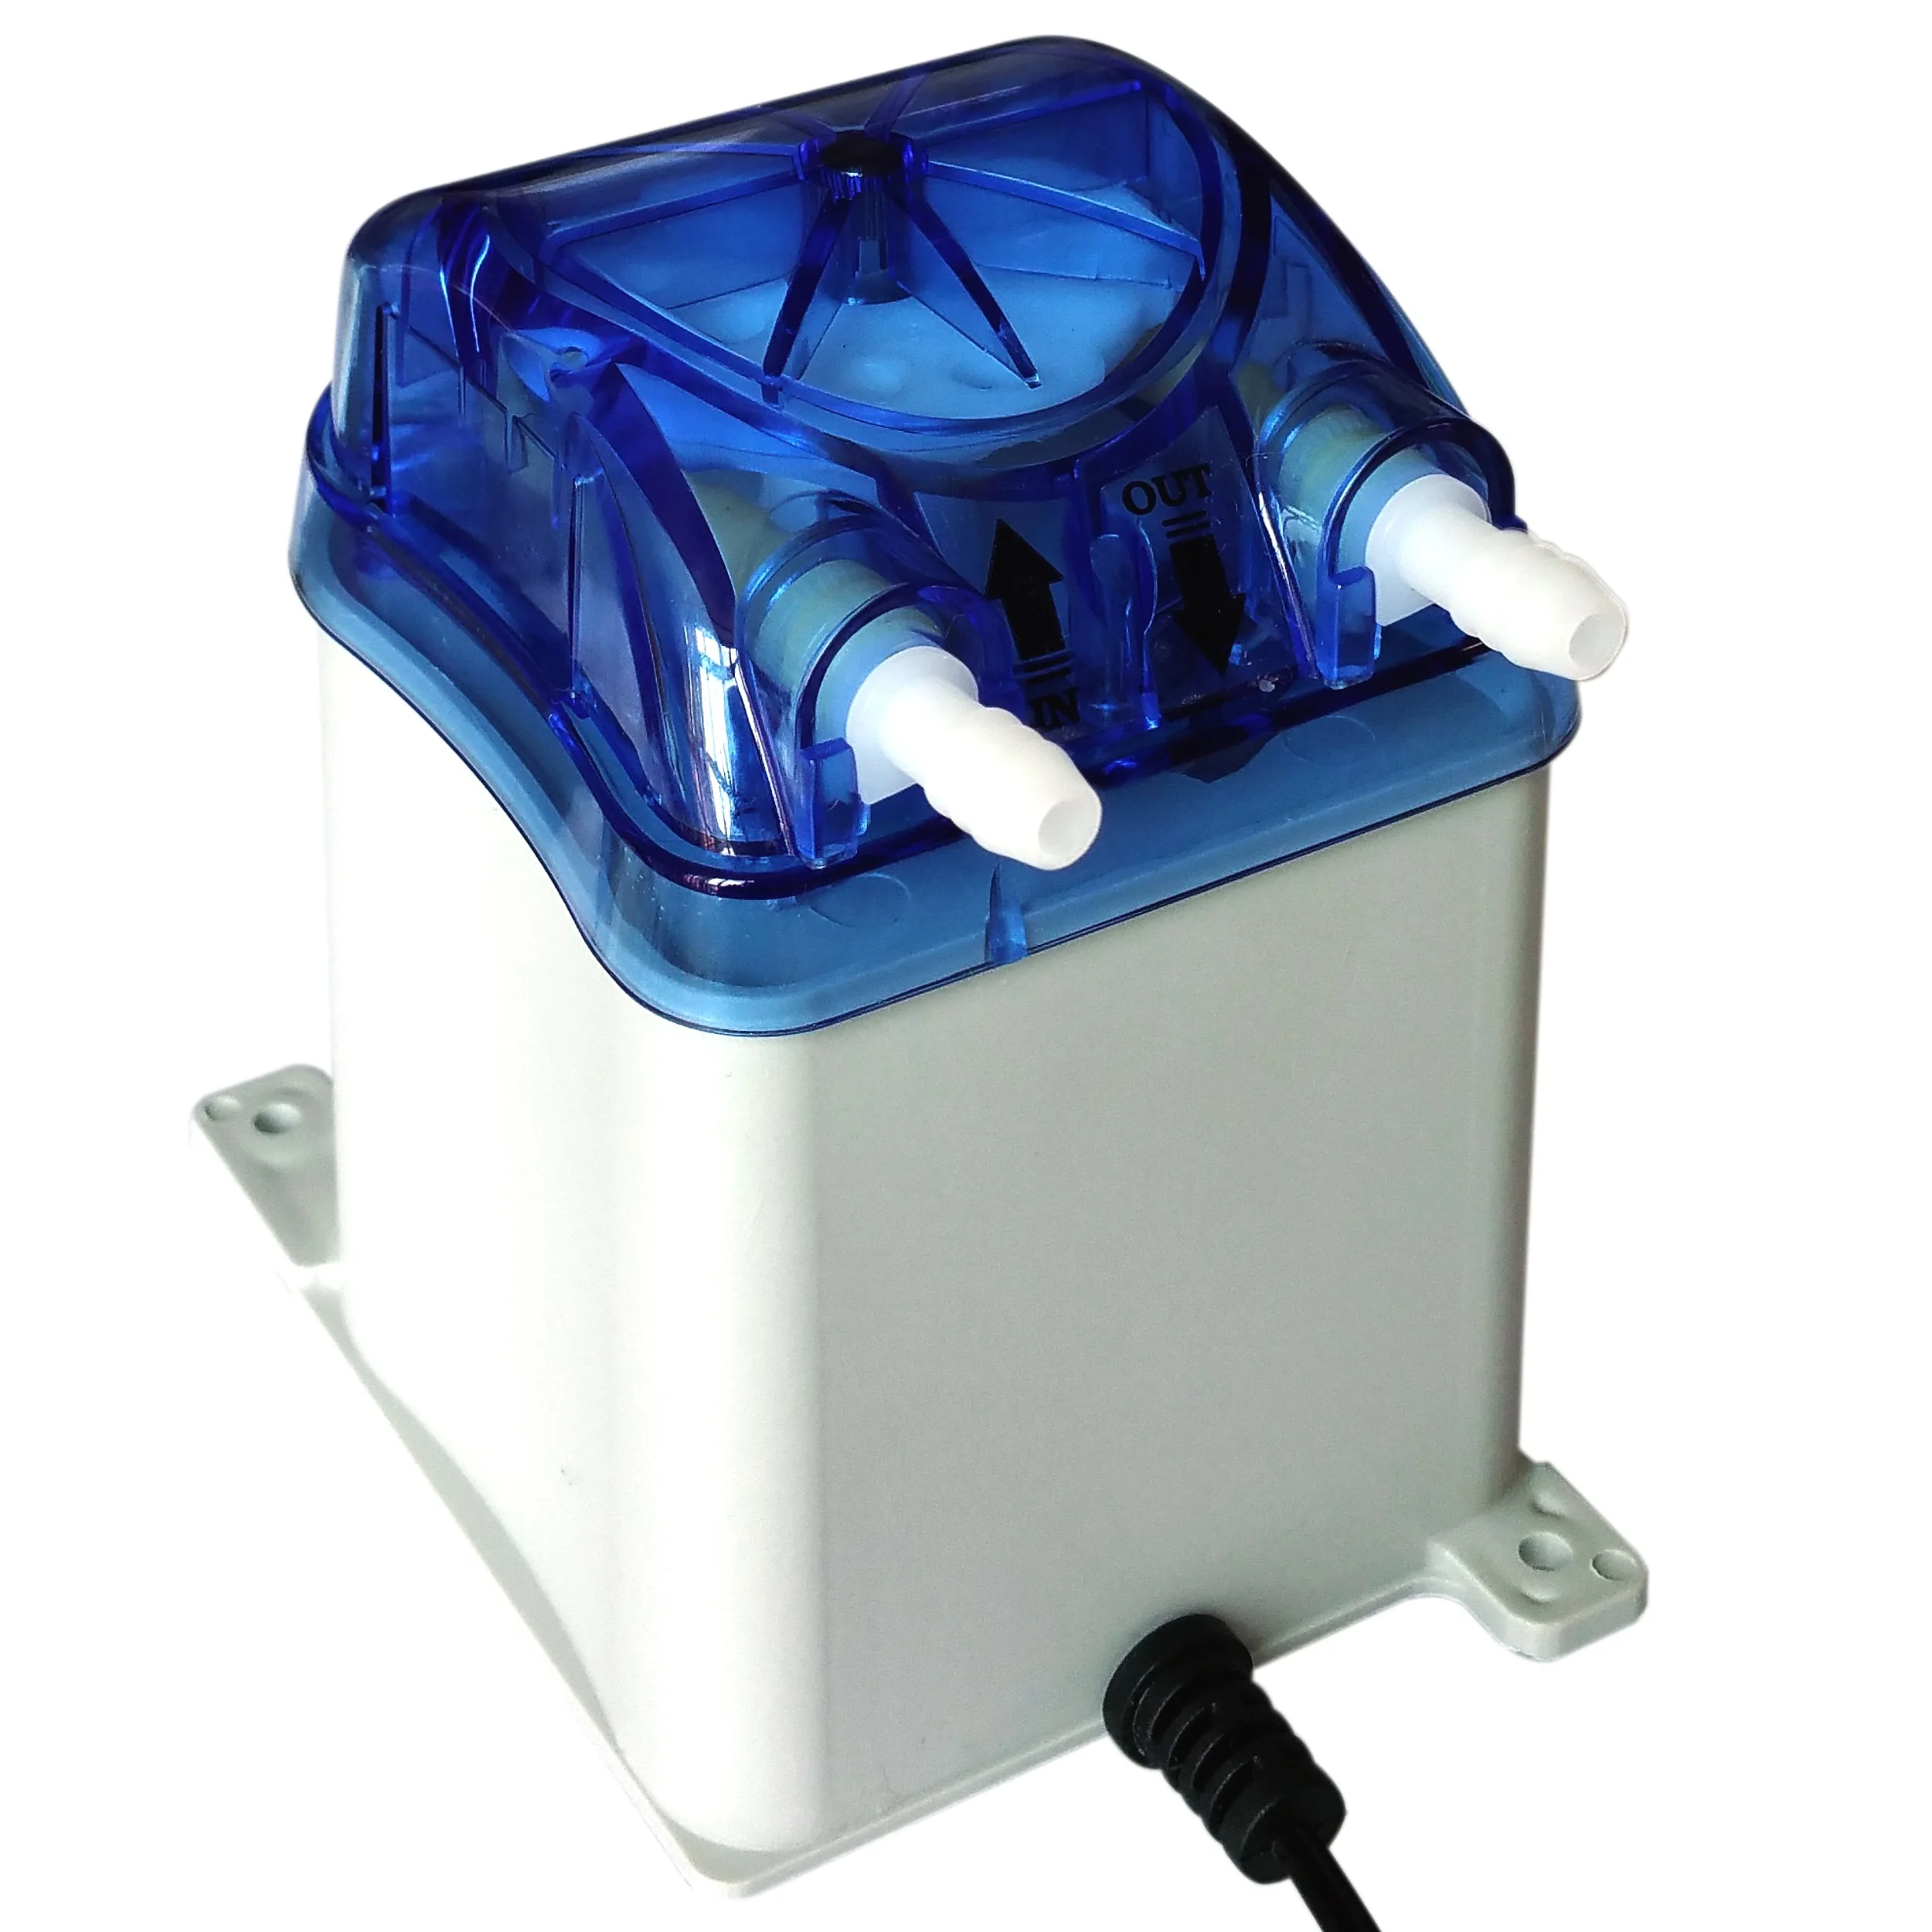 

500ml/min, 2 Rollers, Honlite 12V Peristaltic Pump with Exchangeable Pump Head and PharMed BPT Peristaltic Tube